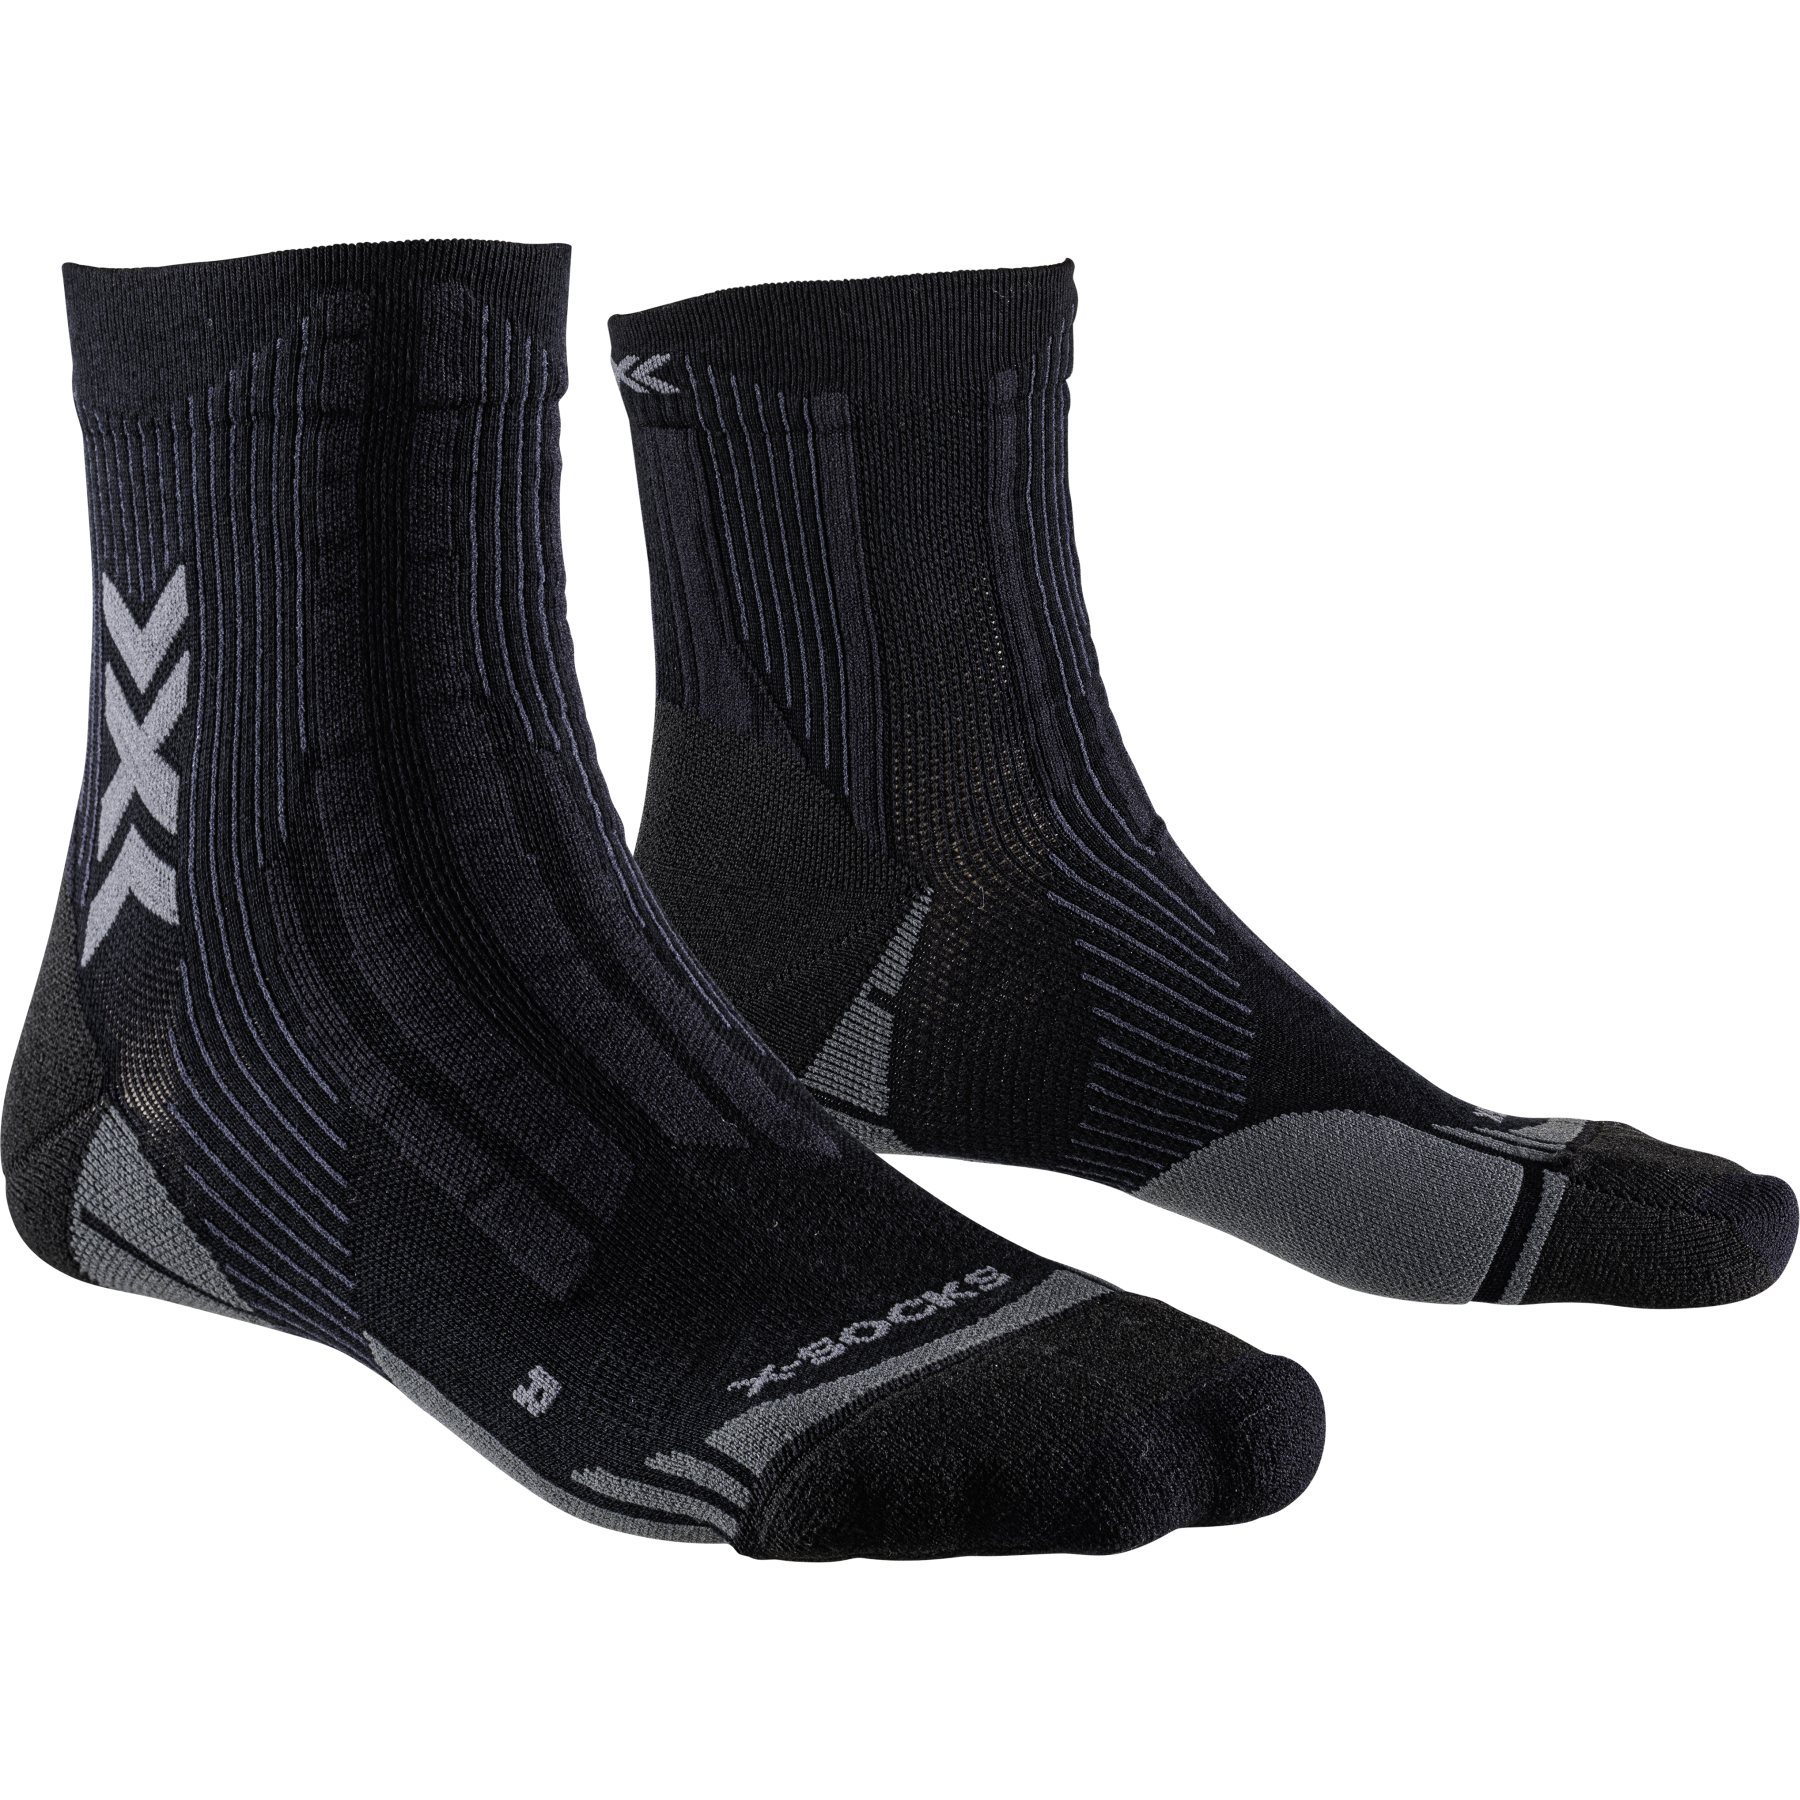 Picture of X-Socks Hike Perform Natural Ankle Socks - black/charcoal